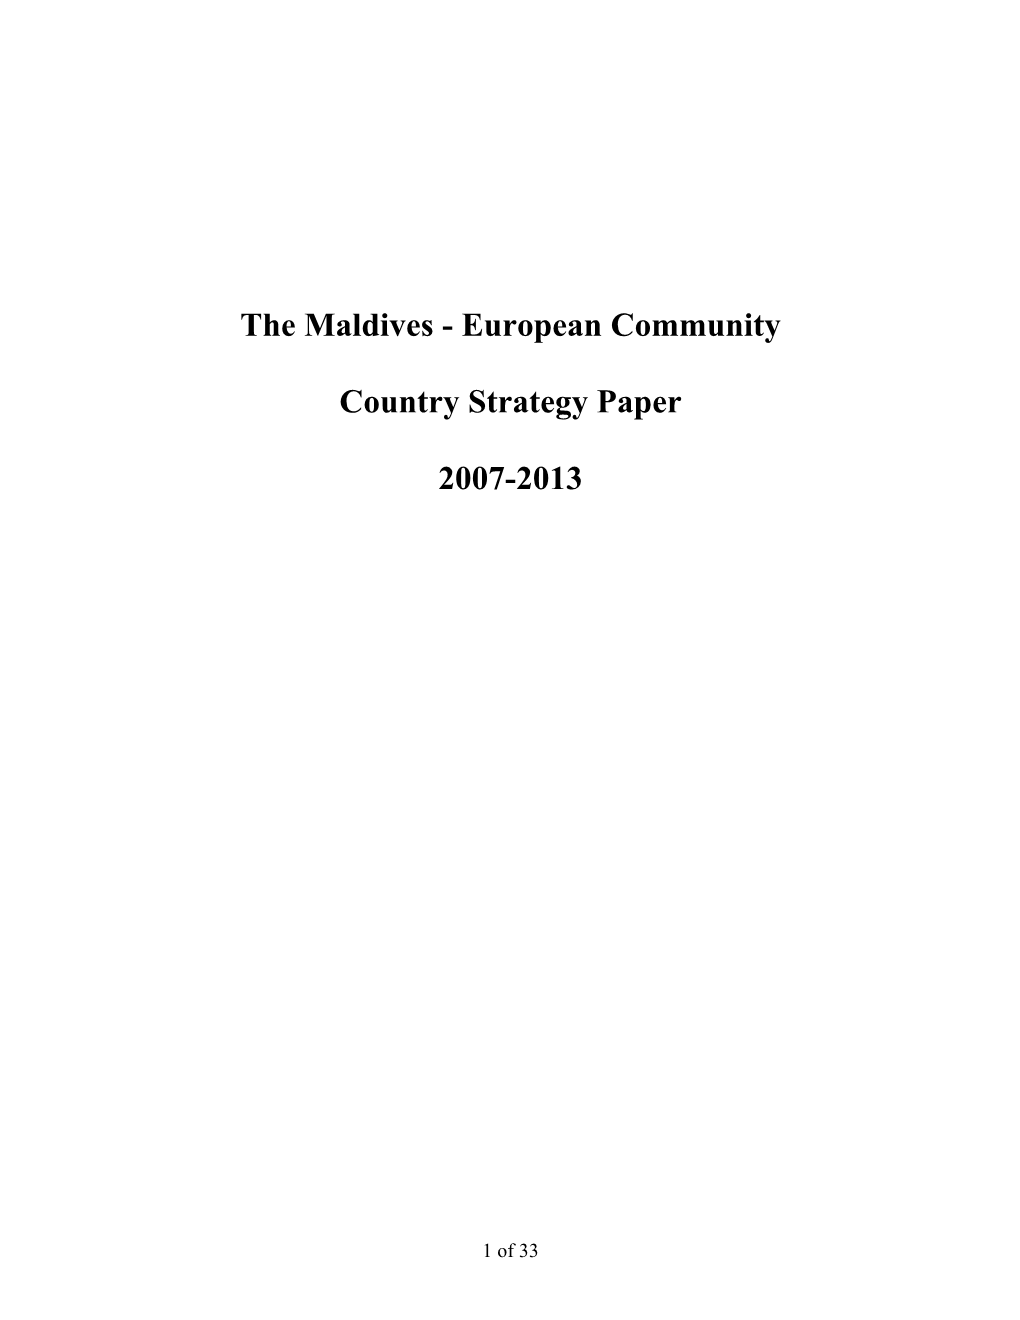 Country Strategy Paper Maldives 2007-2013